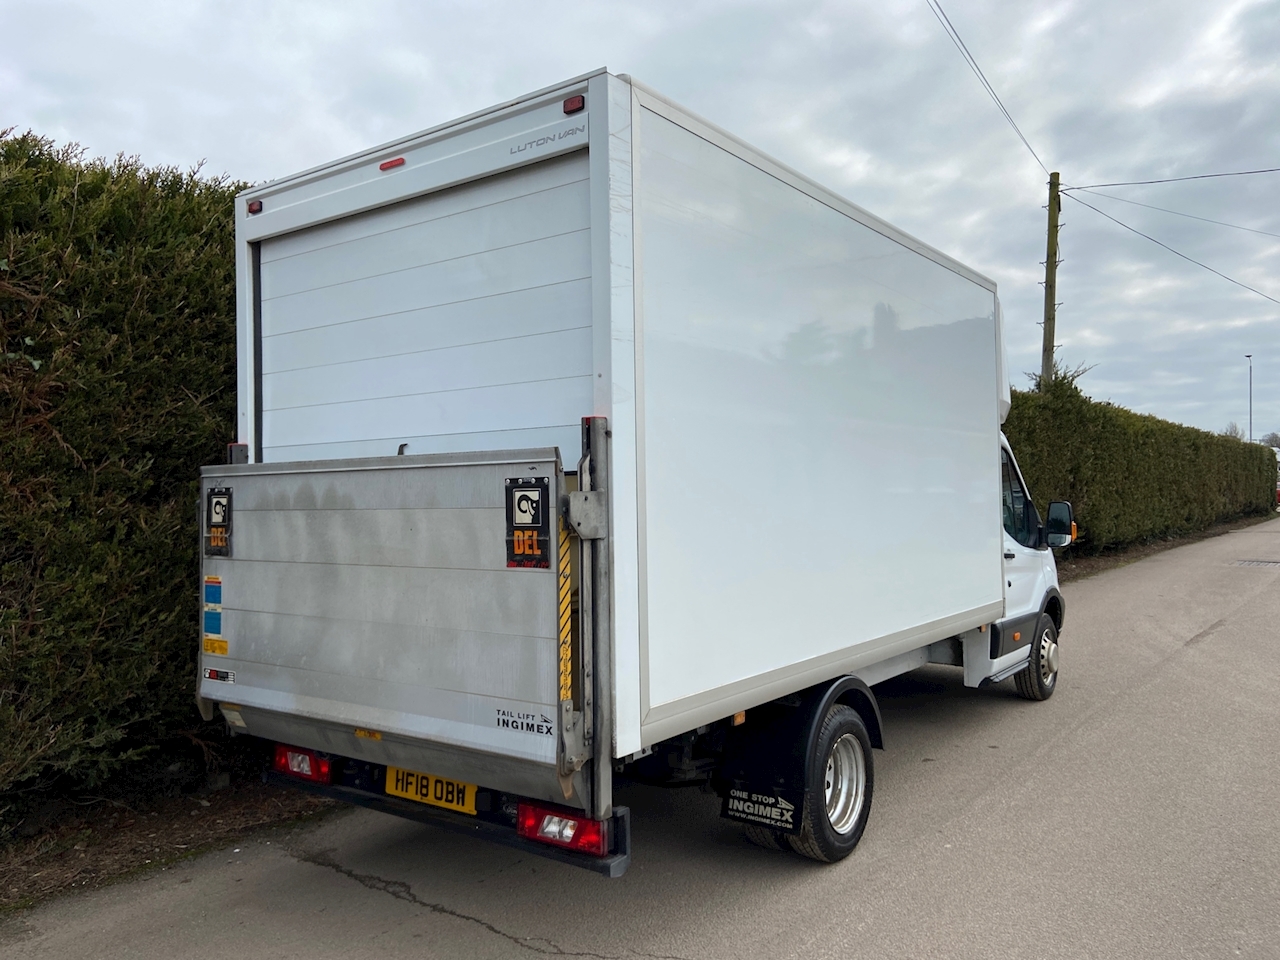 buy luton van with tail lift